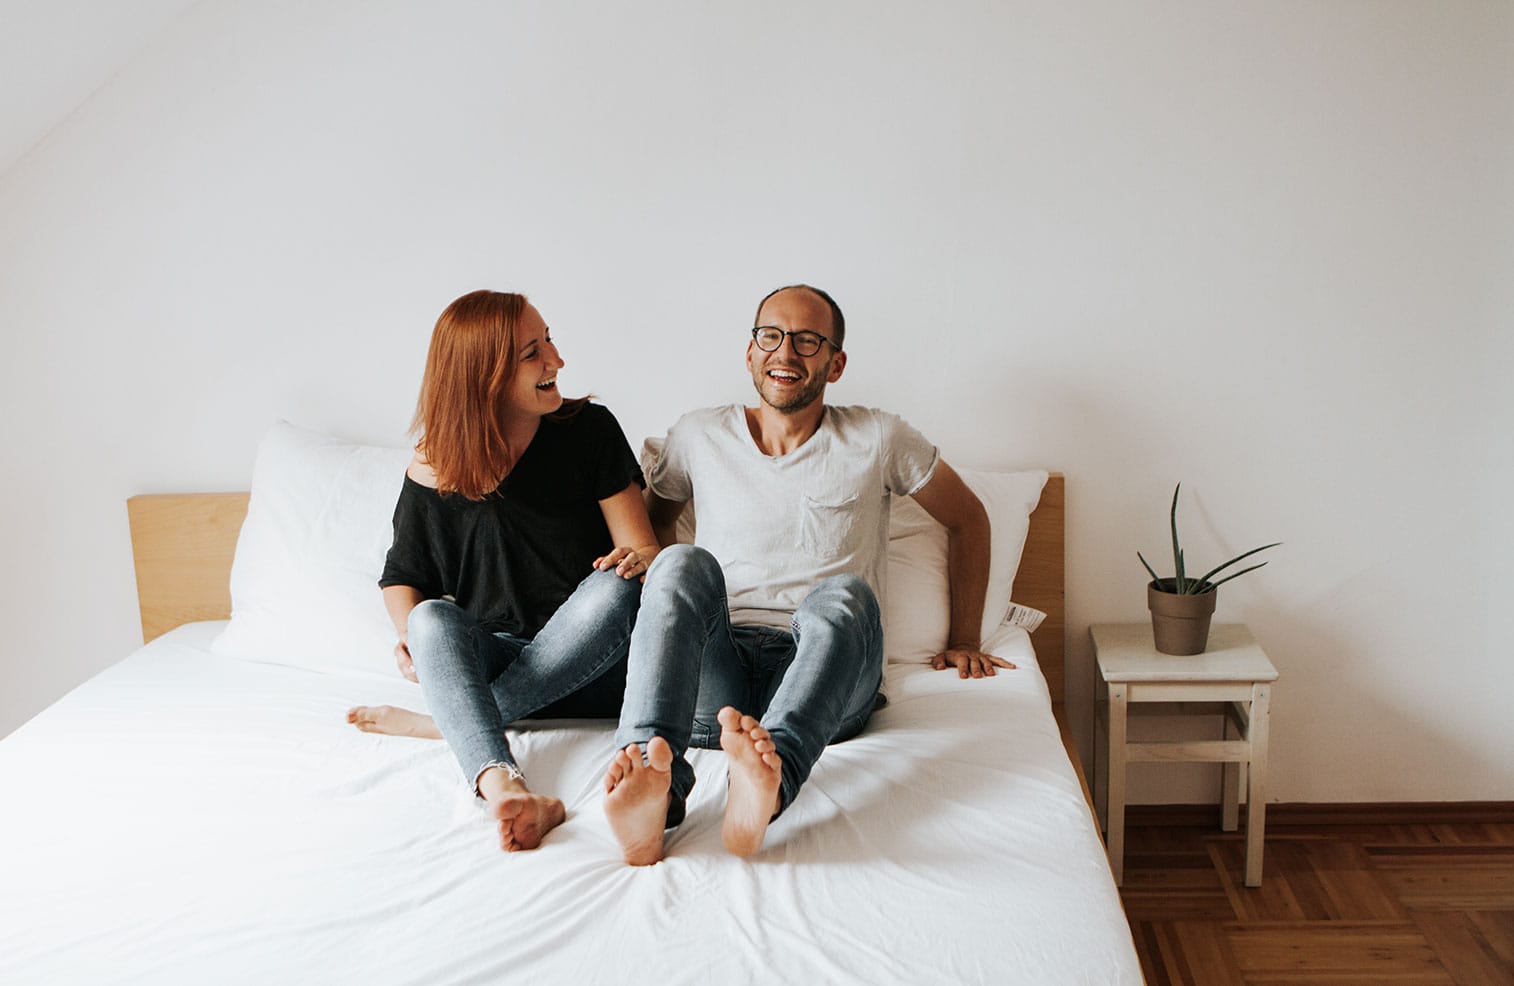 We all go through different challenges and difficulties in our marriage. Try these conversations to connect with your husband when marriage is hard.